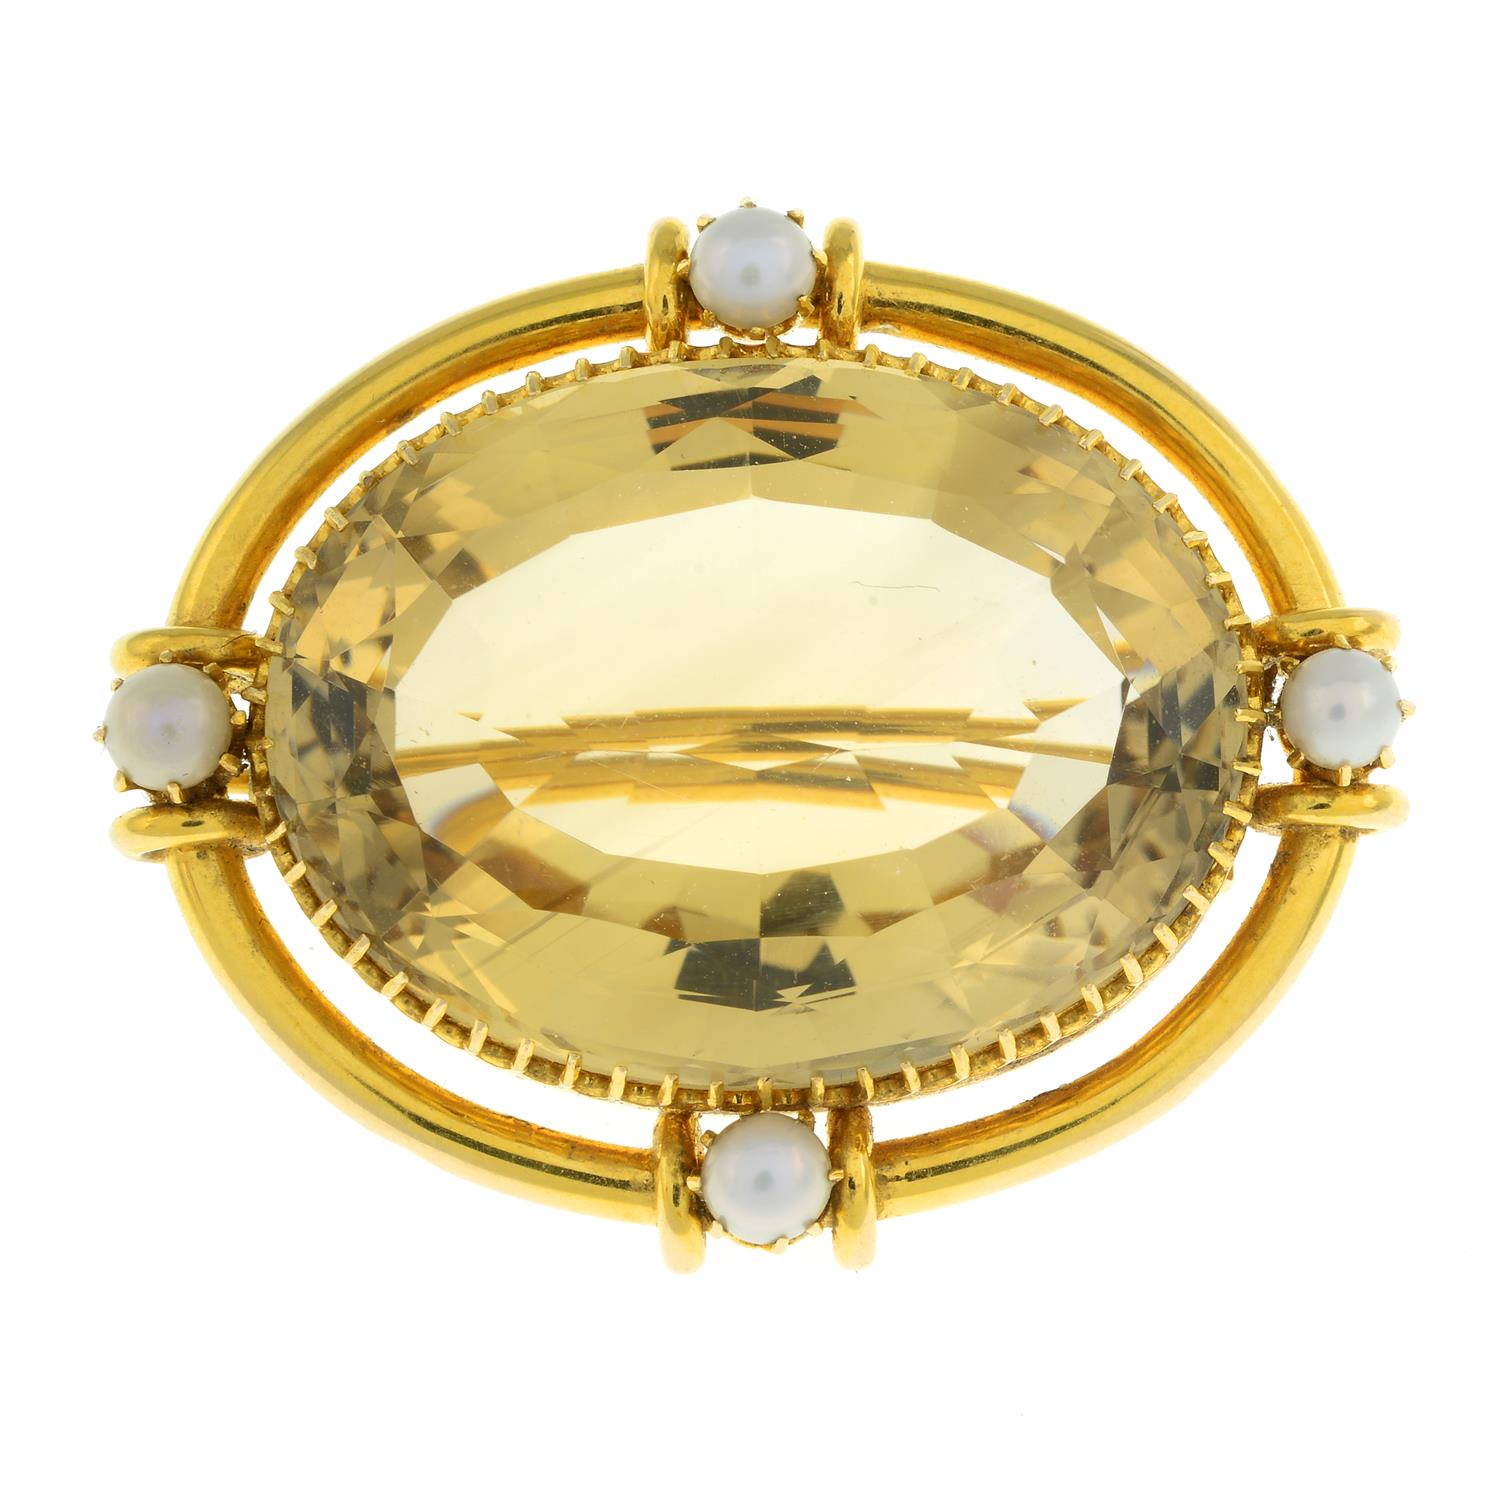 Late 19th century 18ct gold citrine and split pearl brooch - Image 2 of 4